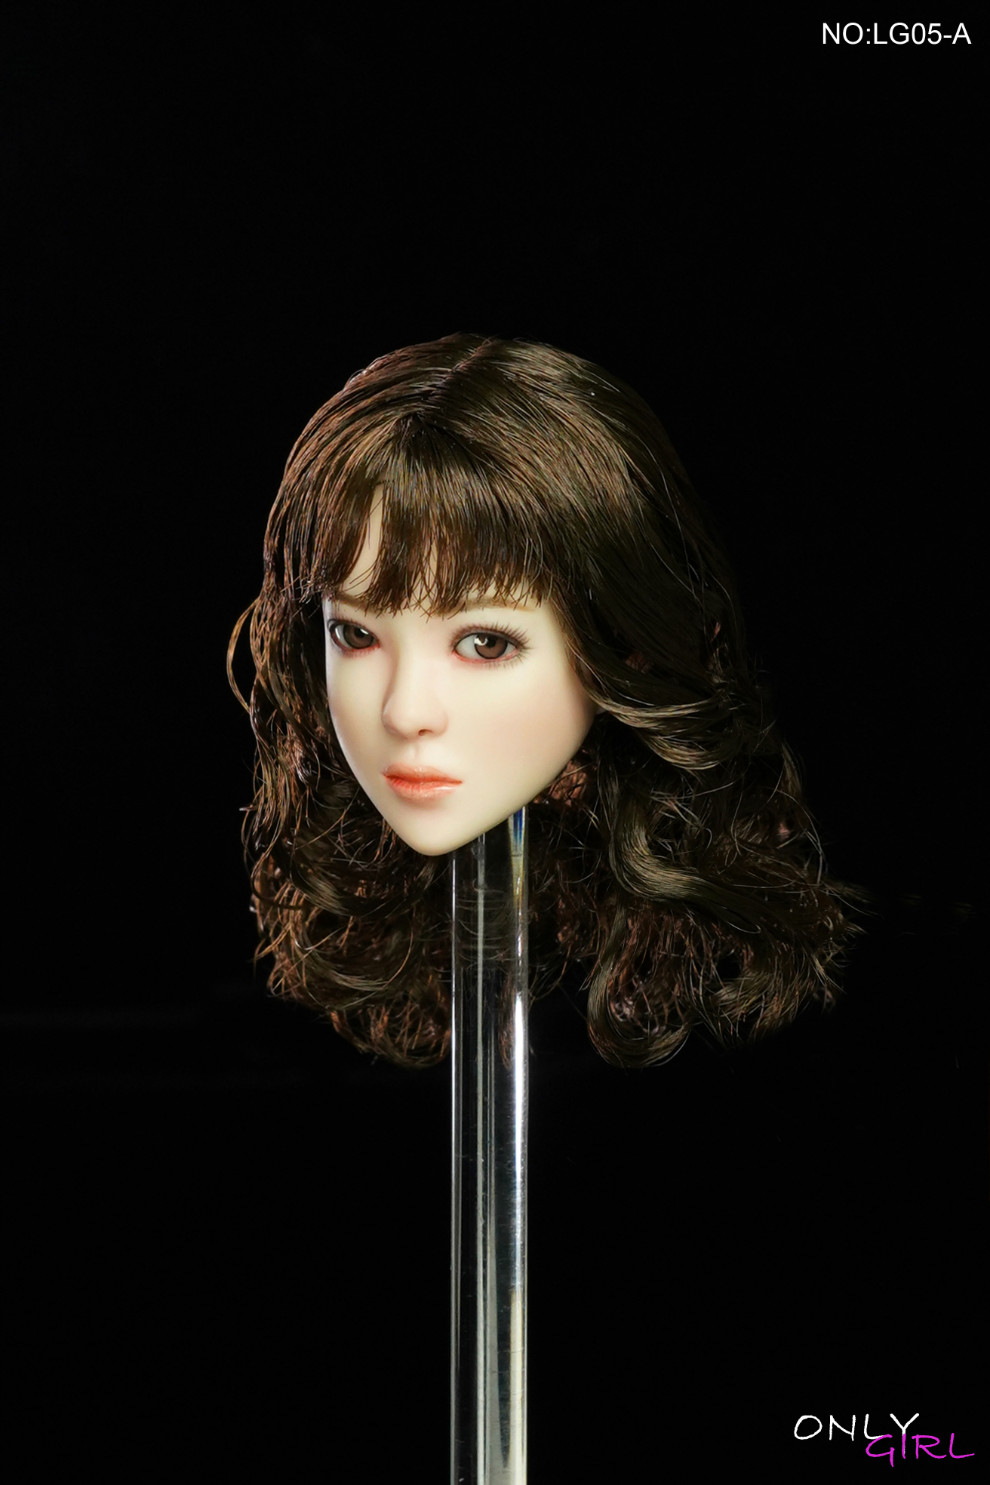 MovableEyes - NEW PRODUCT: ONLYGIRL: 1/6 LG05 movable eye female head carving - ABC three models 4196